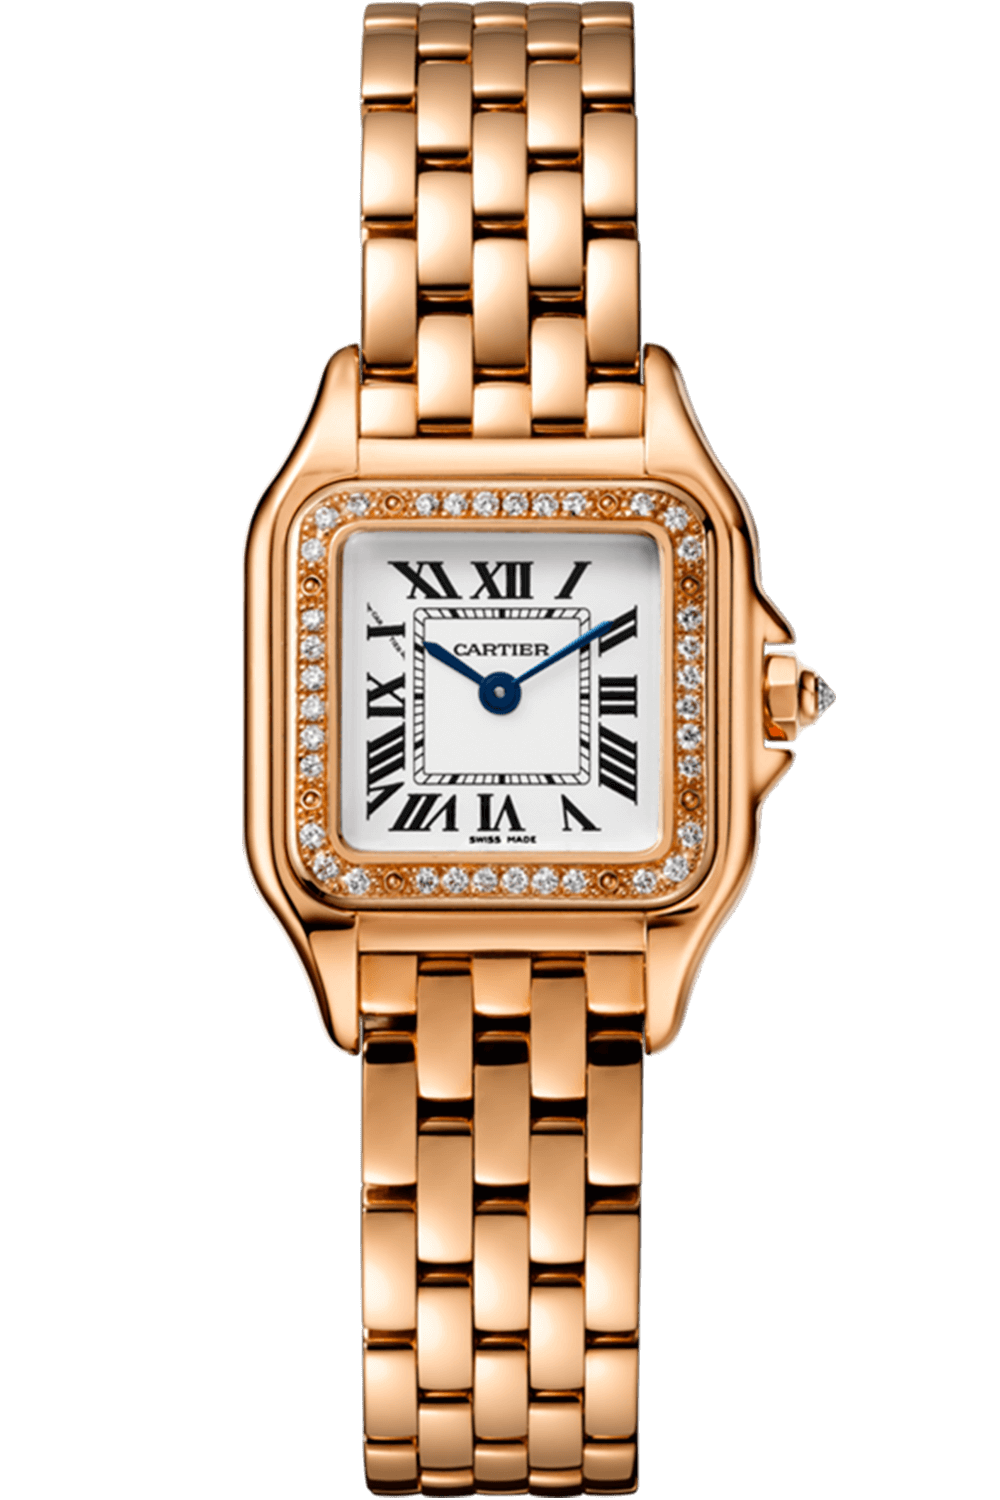 cartier panthere gold watch with diamonds